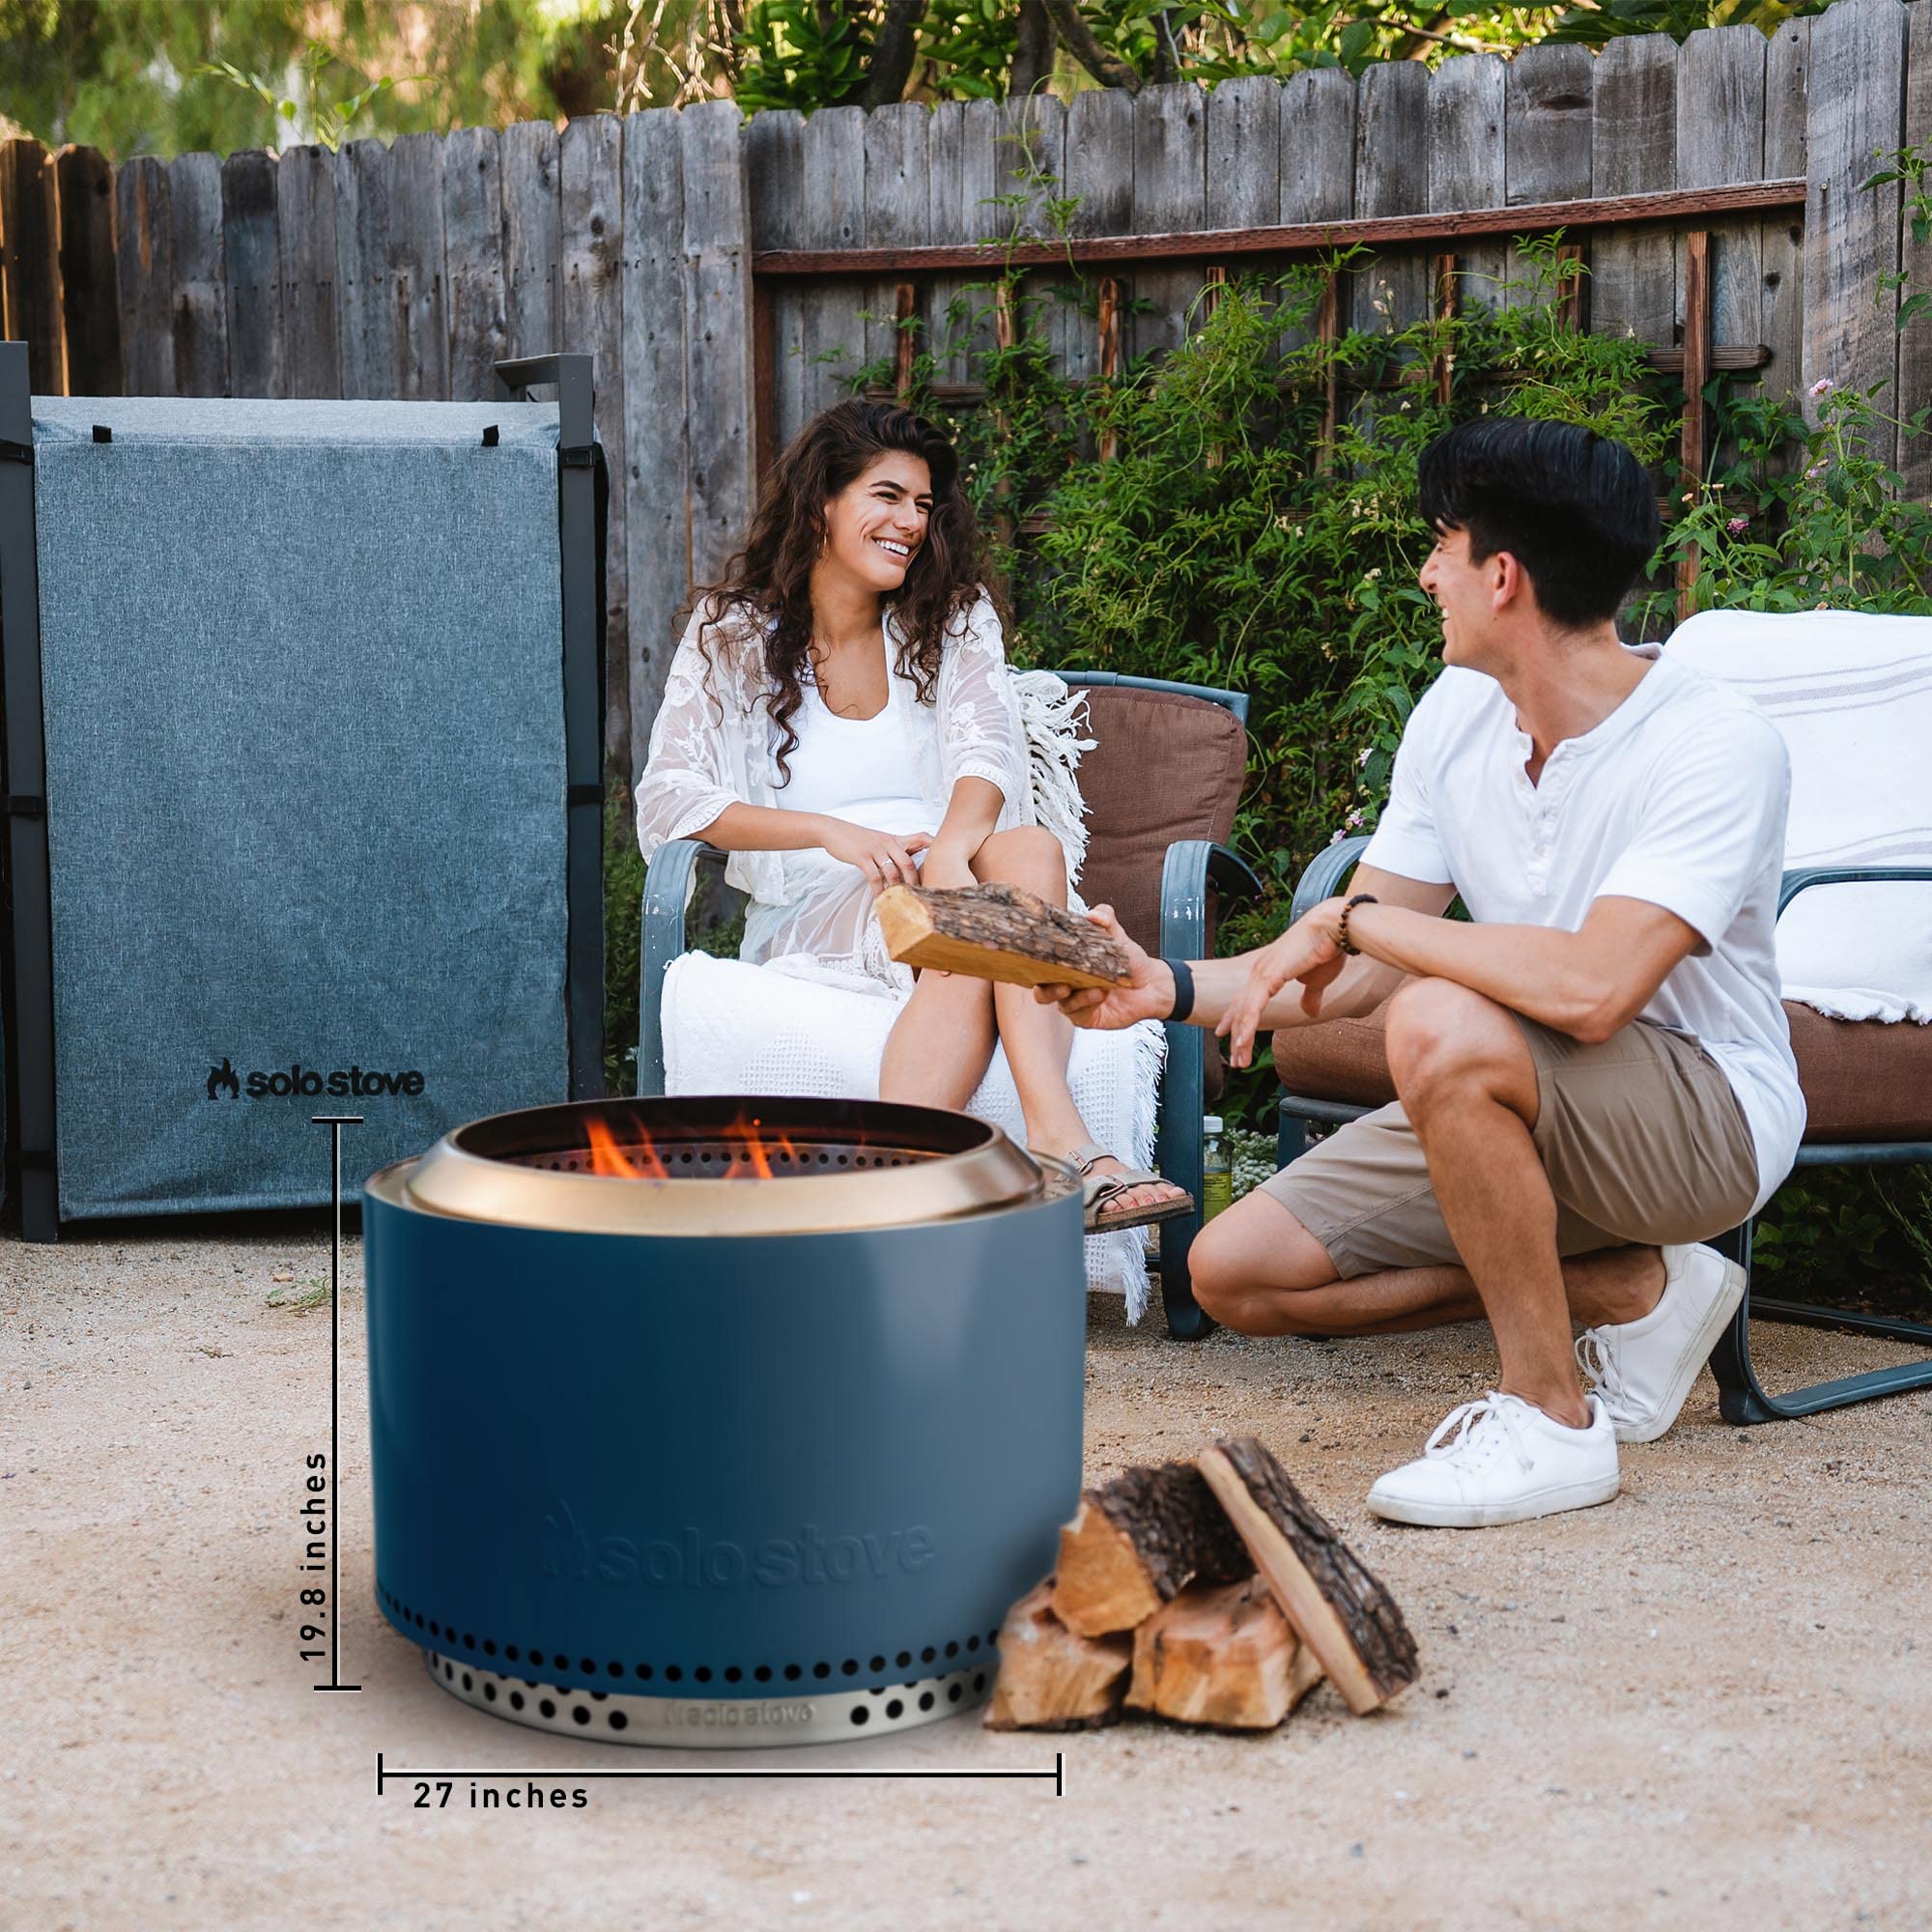 Solo Stove Yukon 2.0 with Stand, Smokeless Fire Pit | Portable Wood Burning Fireplace with Removable Ash Pan, Large Outdoor Firepit, Stainless Steel, H: 19.8 in x Dia: 27 in, 43.9. lbs, Color: Water